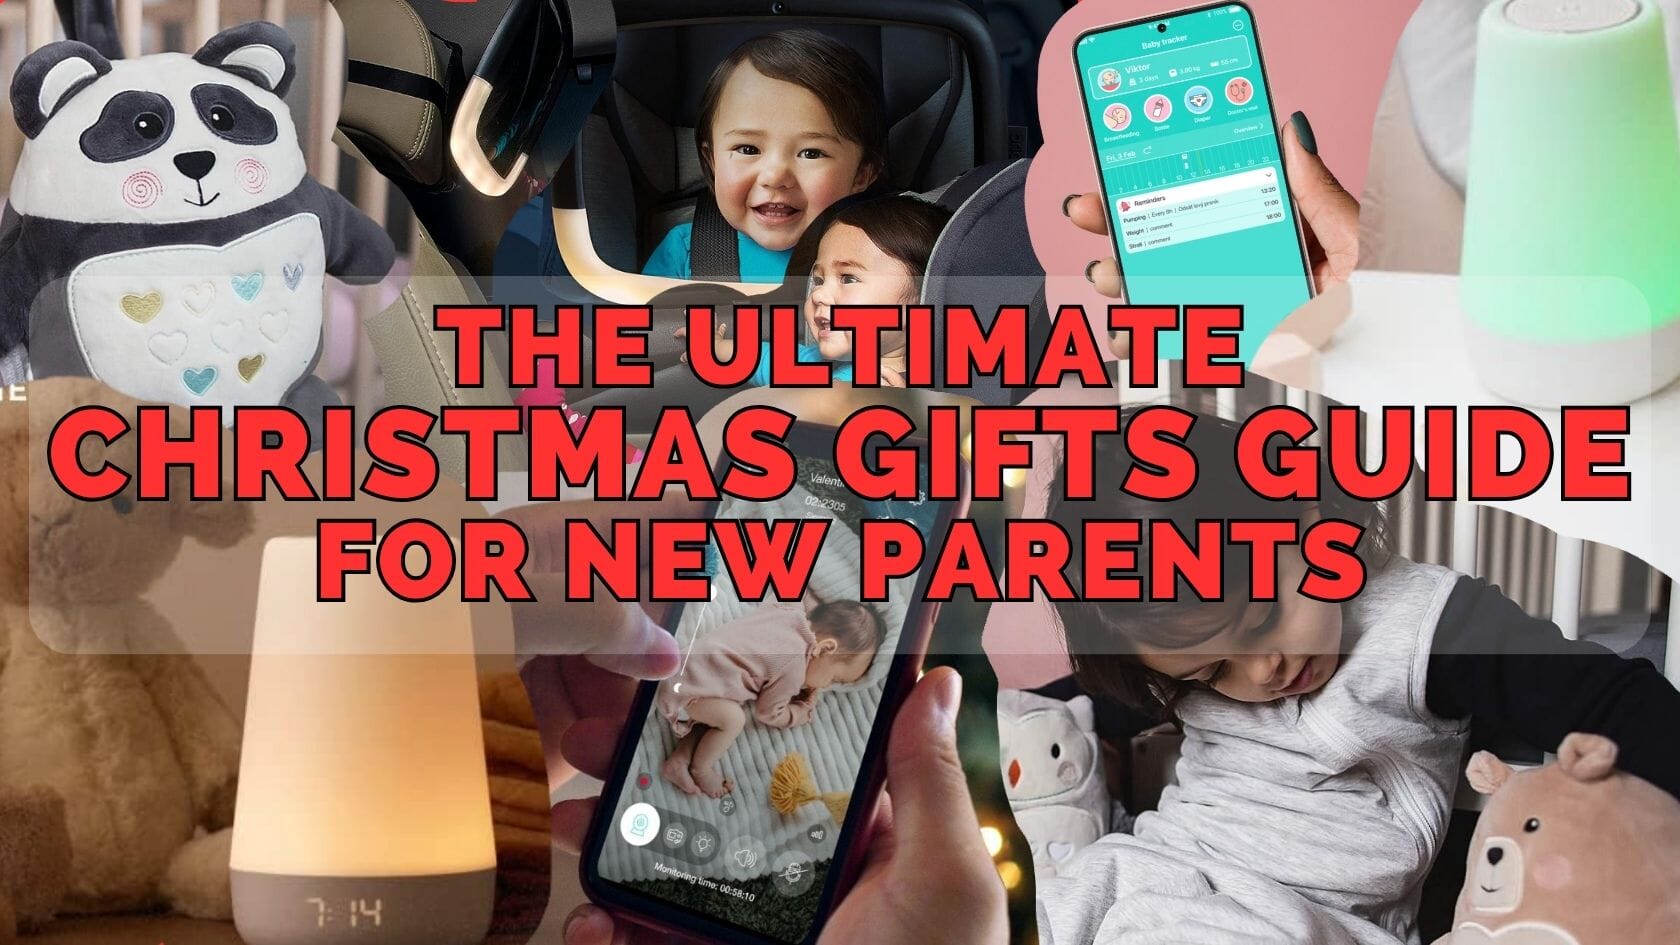 PARENTS ADVISE] Top 6 Best Christmas Gifts for New Parents - Annie